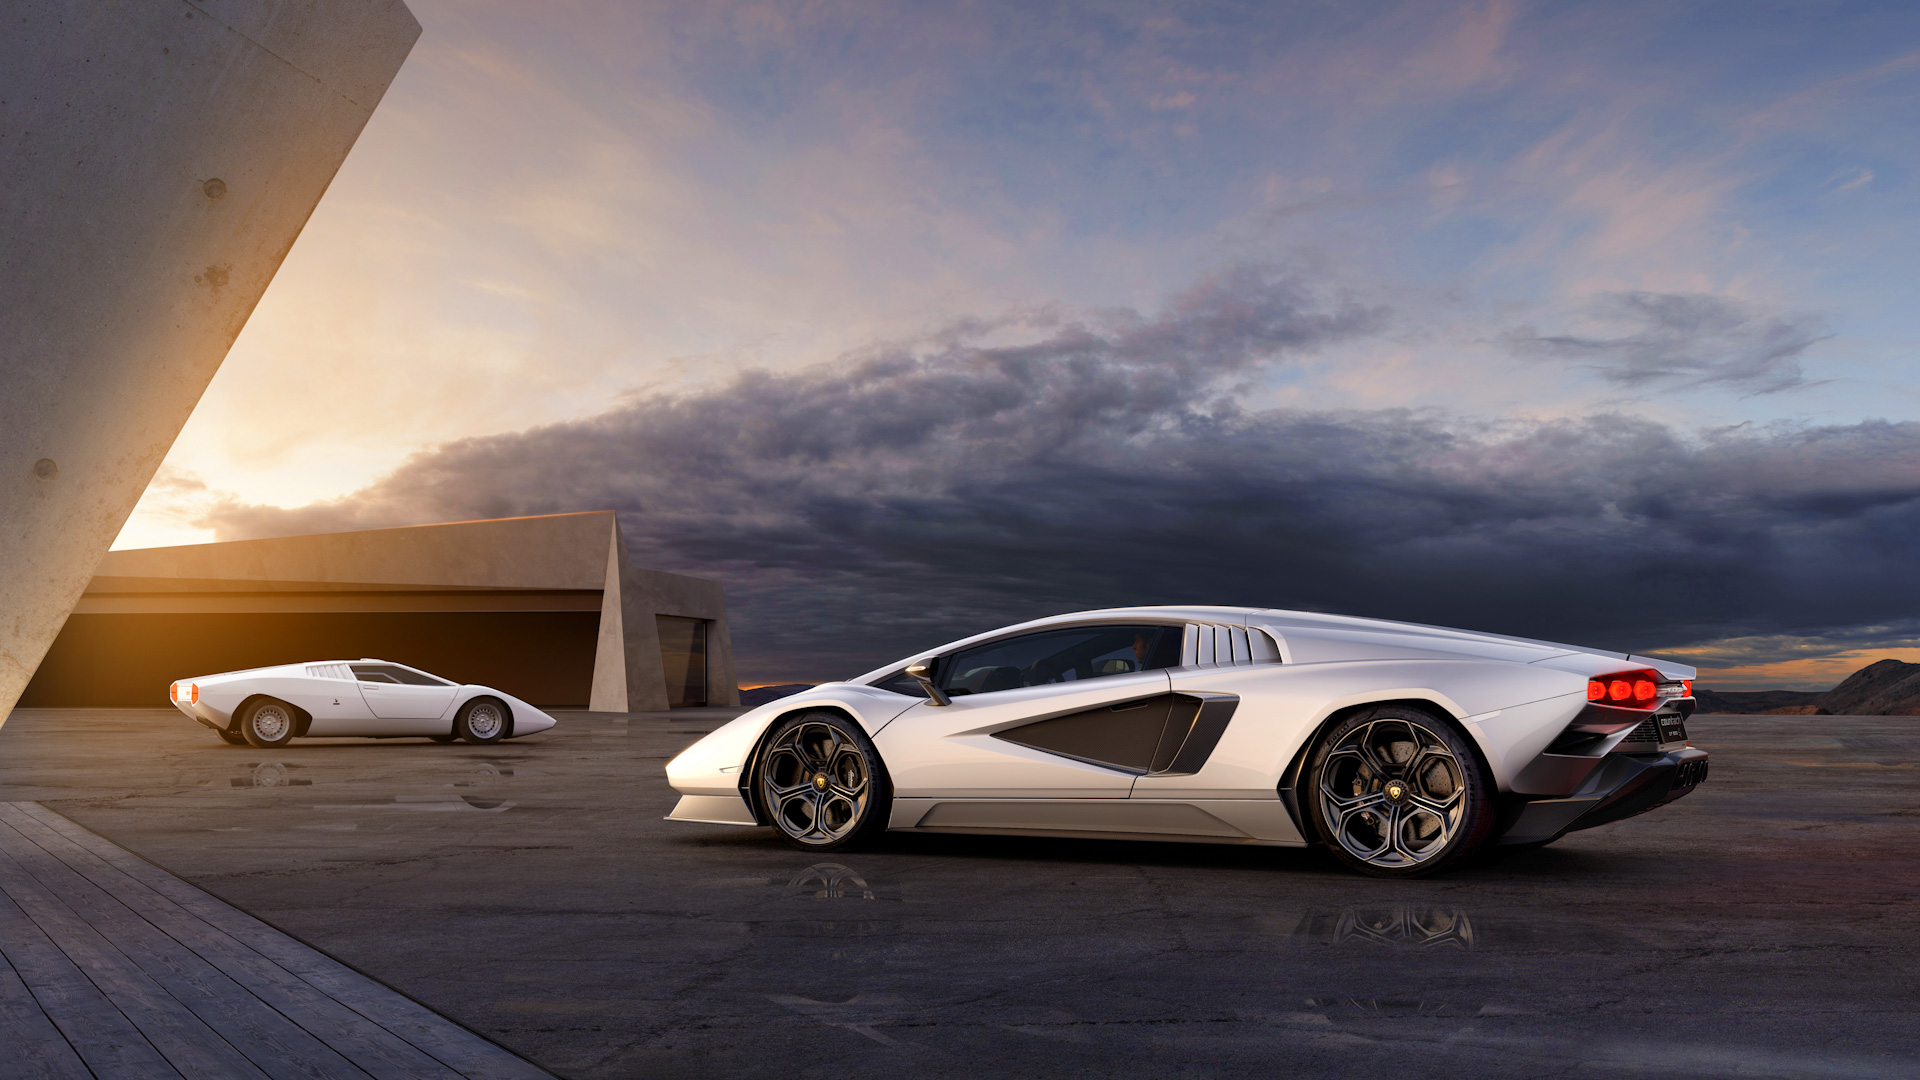 New 2022 Lamborghini Countach with old Countach at the back 